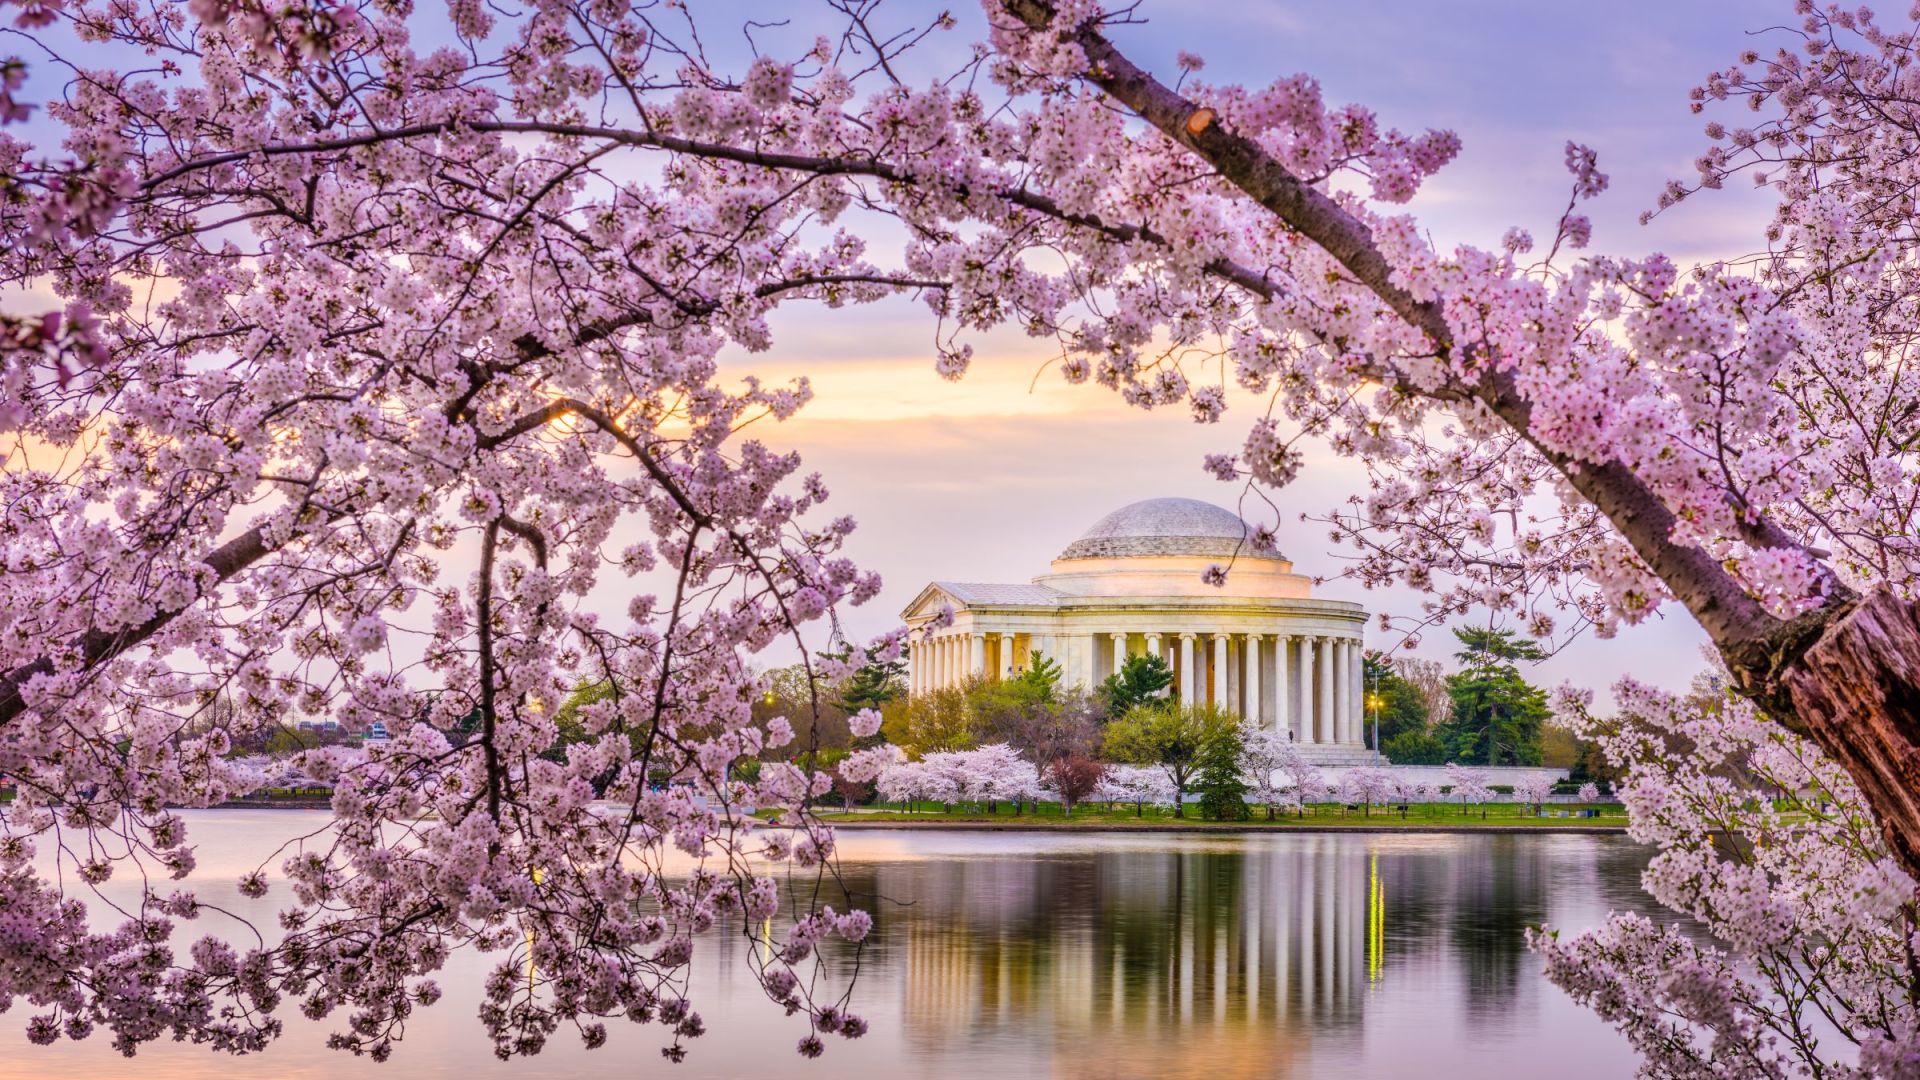 A Building With A Dome And Pink Blossoms On The Trees